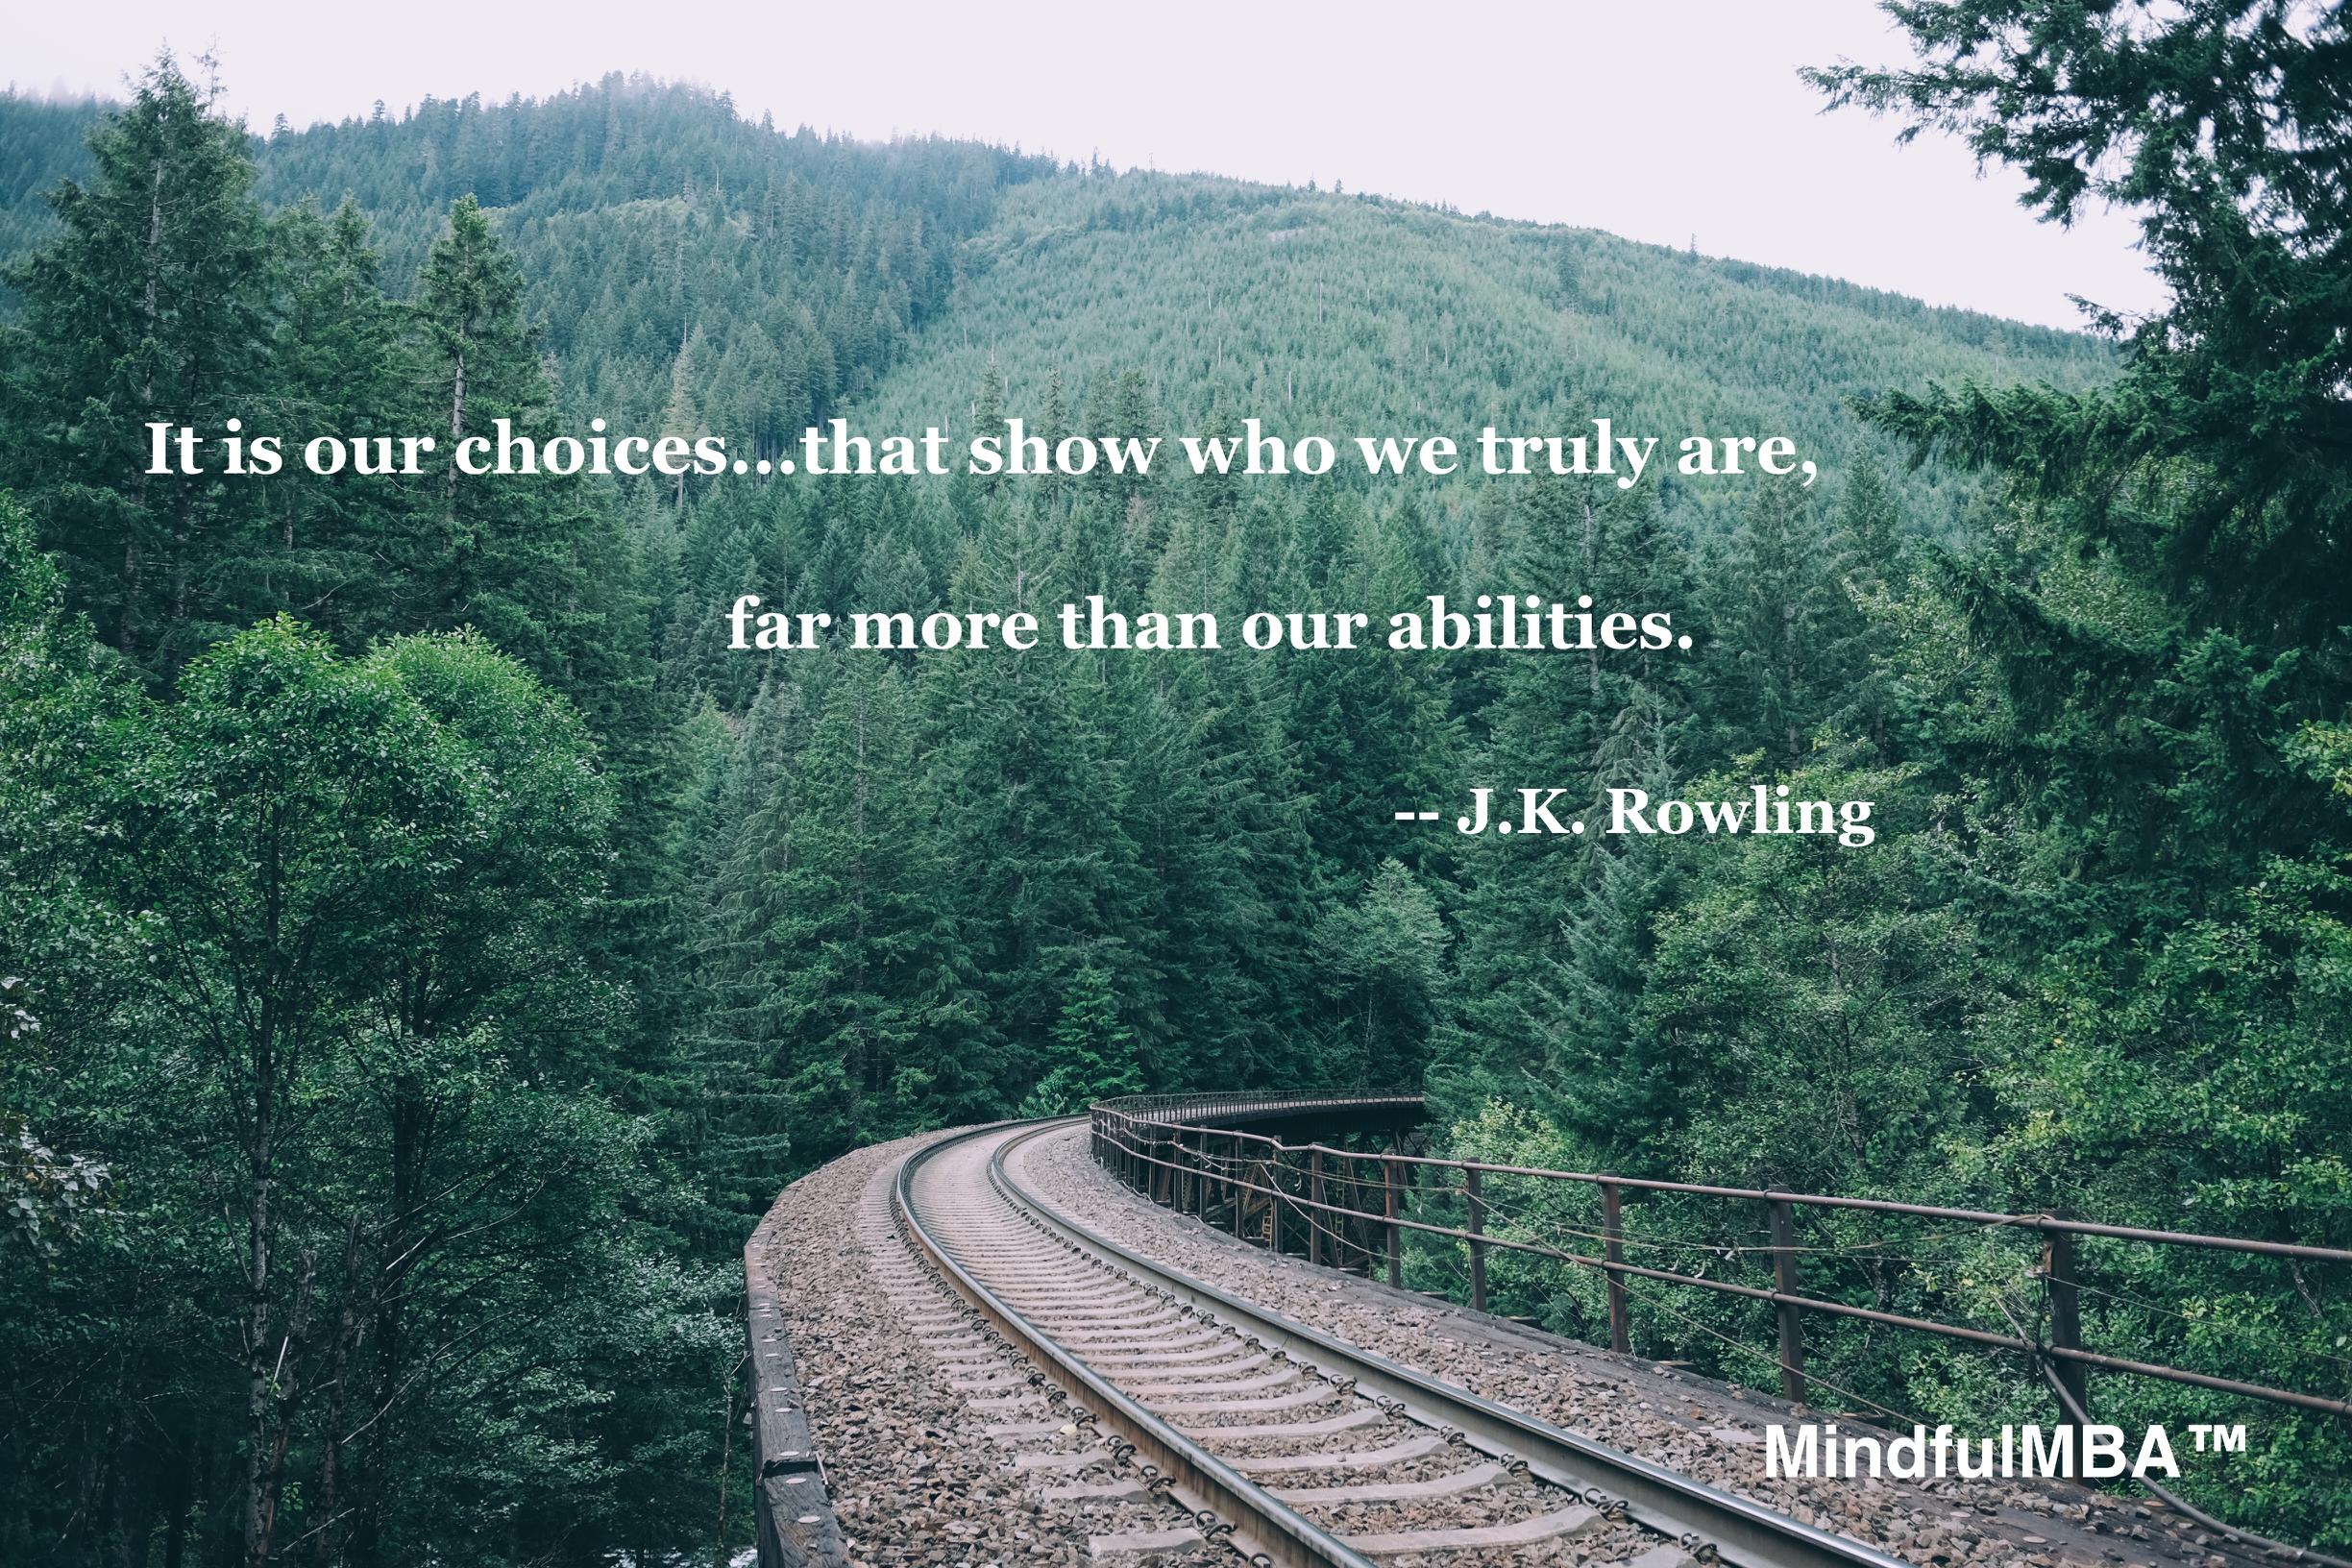 jk-rowling-choices-quote-w-tag